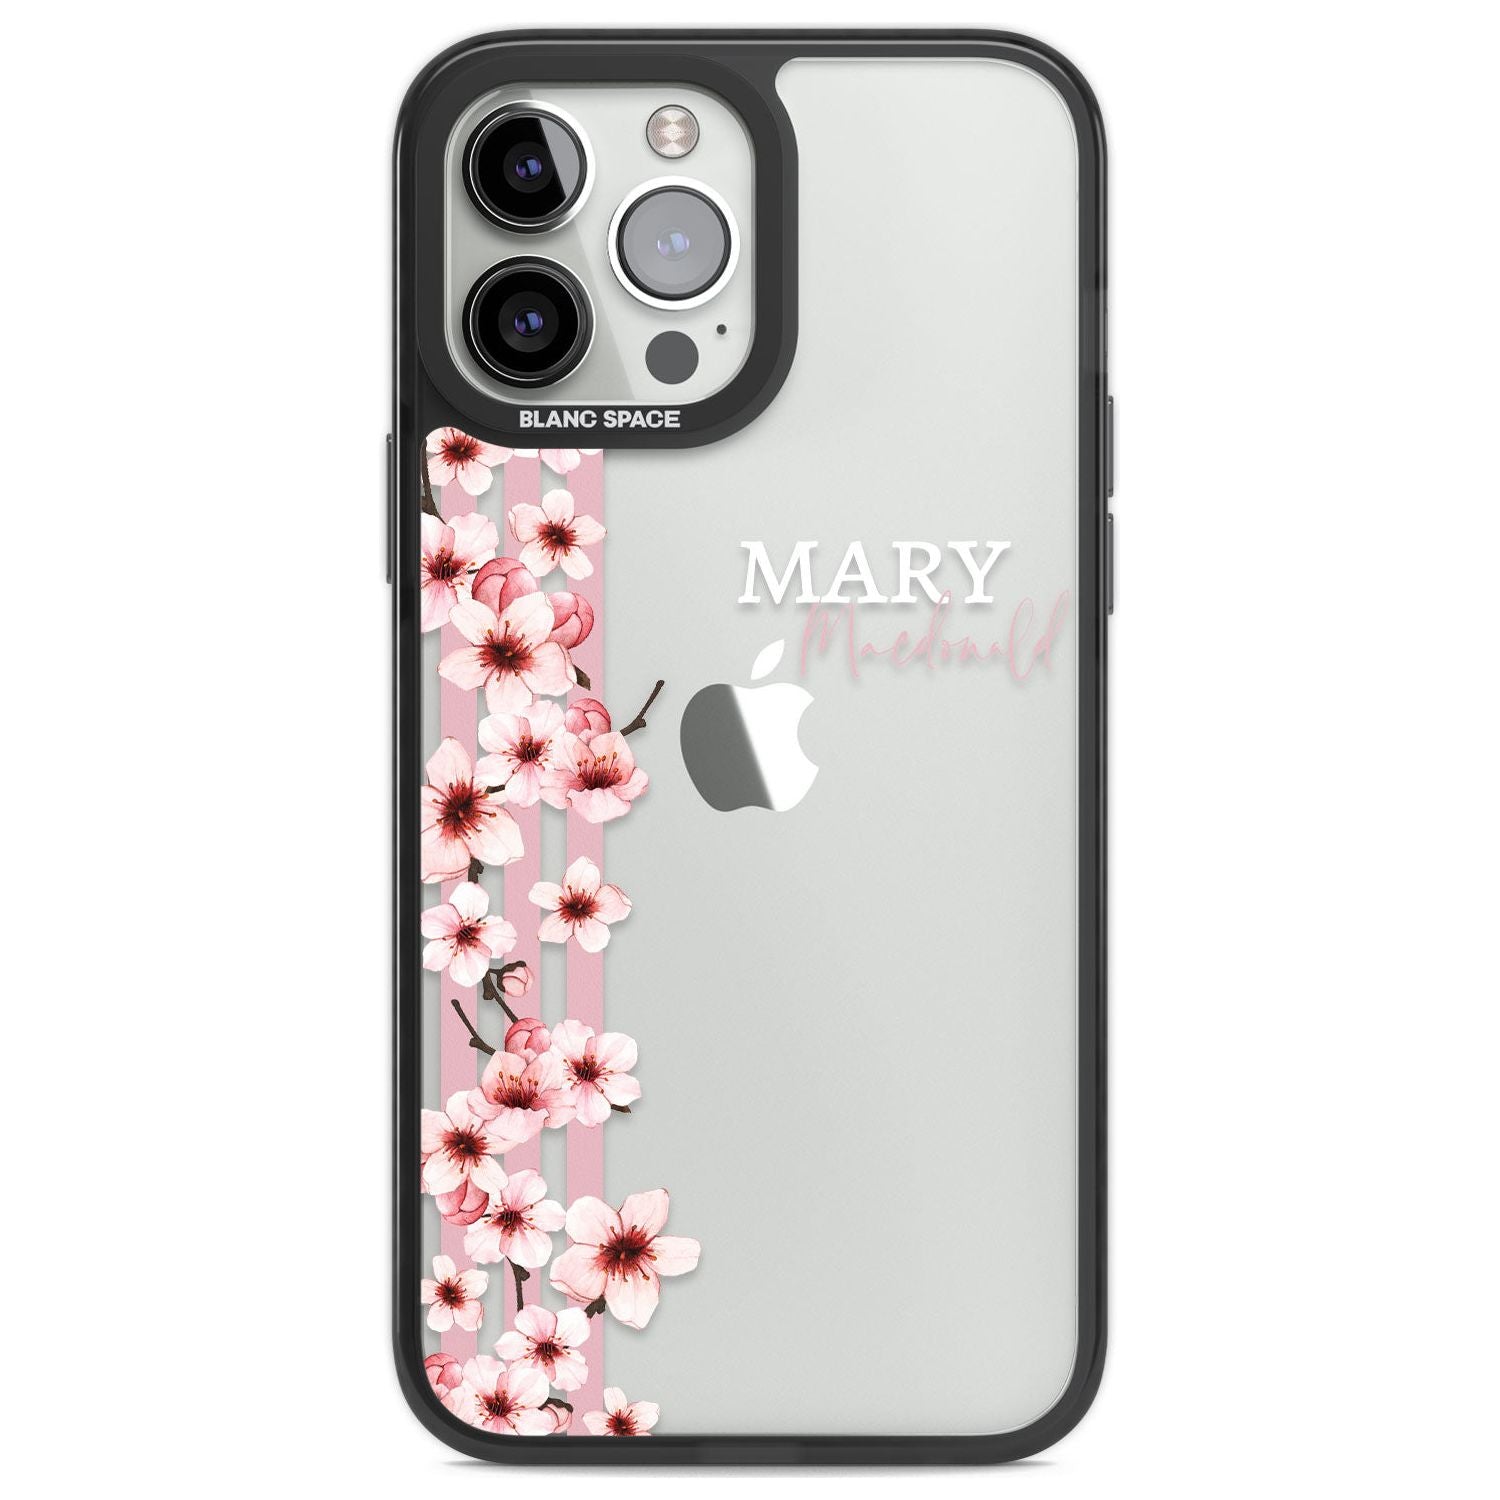 Personalised Cherry Blossoms & Stripes Custom Phone Case iPhone 13 Pro Max / Black Impact Case,iPhone 14 Pro Max / Black Impact Case Blanc Space